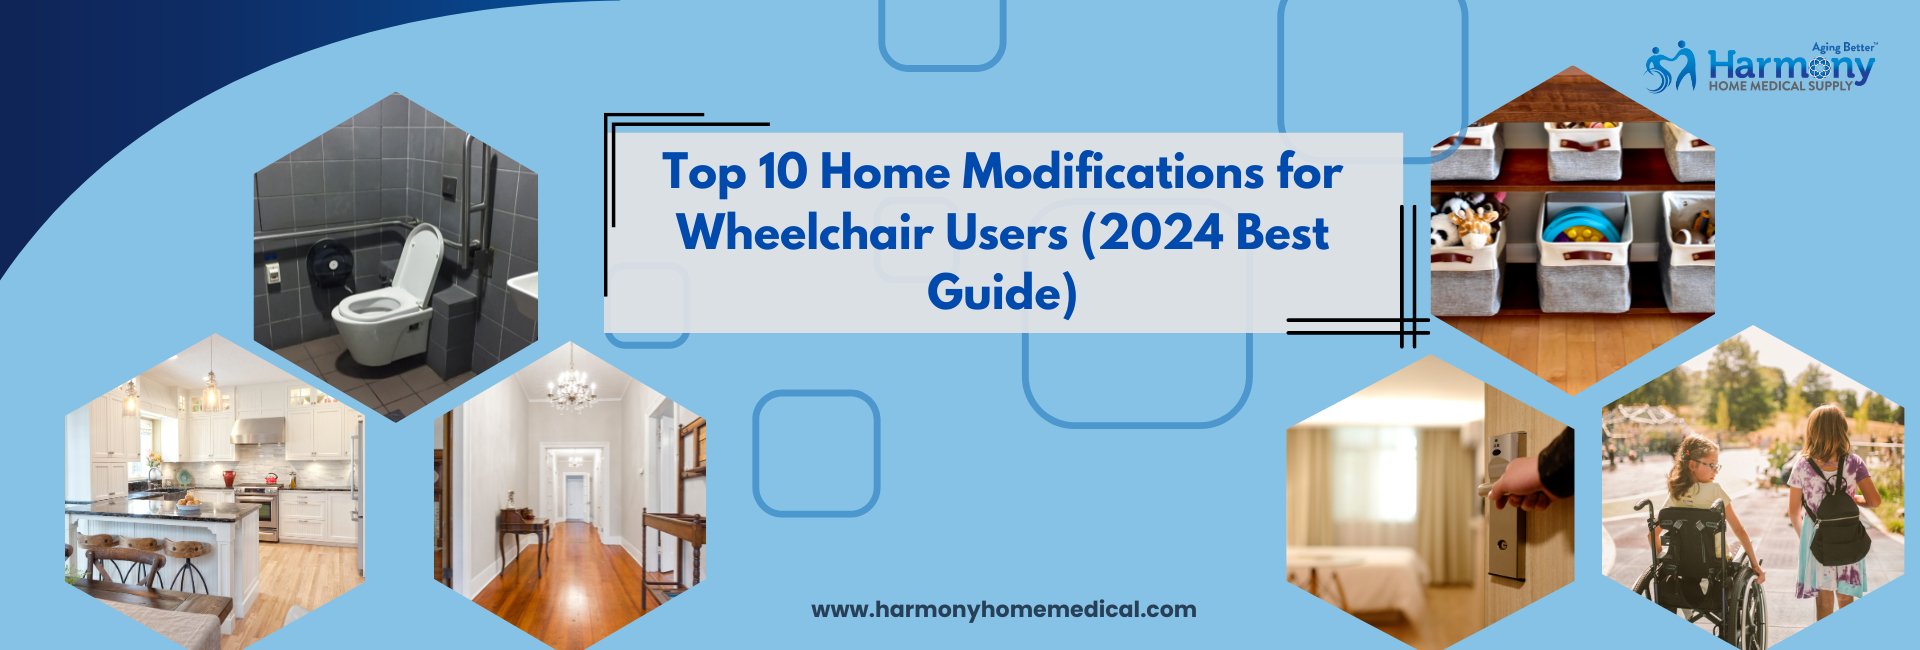 Top 10 Home Modifications for Wheelchair Users (2024 Best Guide) - Harmony Home Medical Supply